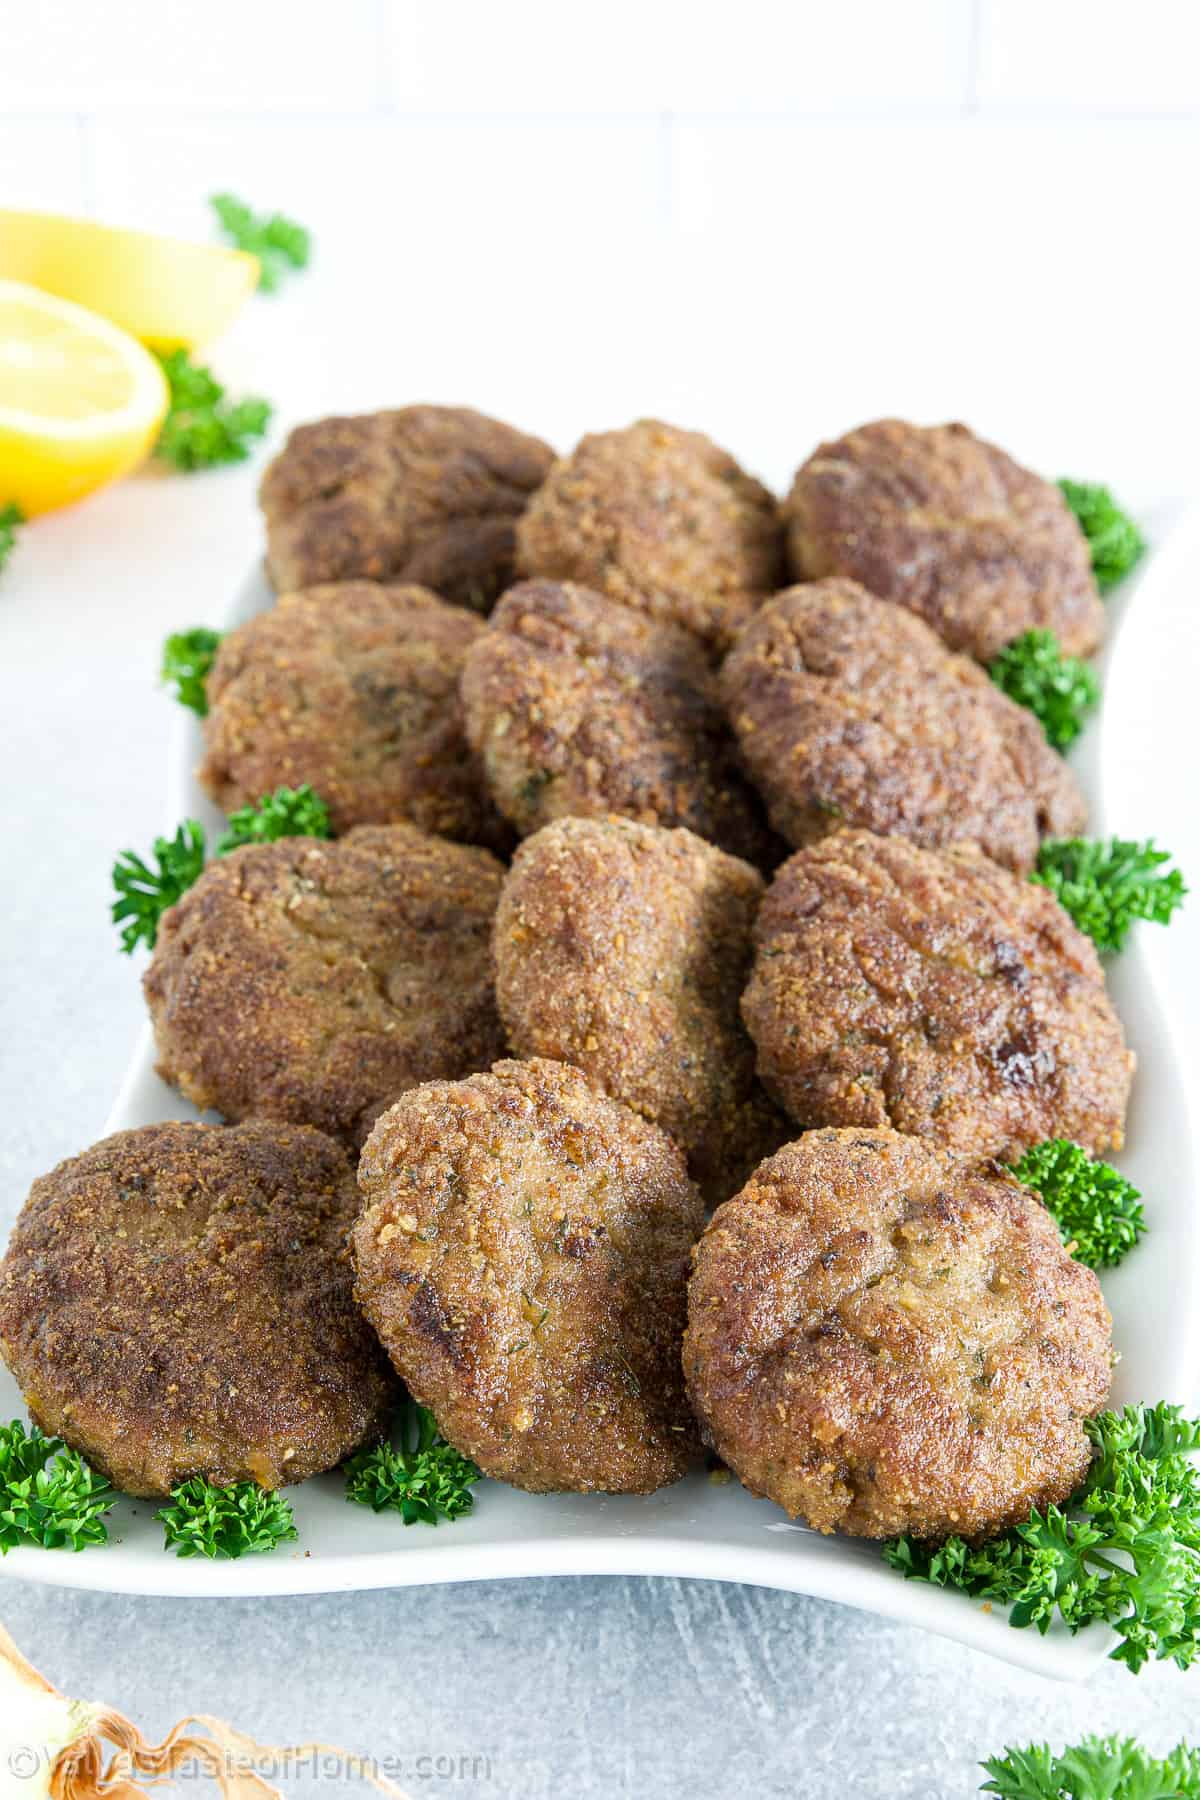 This Beef Cutlet recipe will give you tender and juicy cutlets on the inside, with a perfectly crispy outside for the tastiest beef cutlet you've ever had!